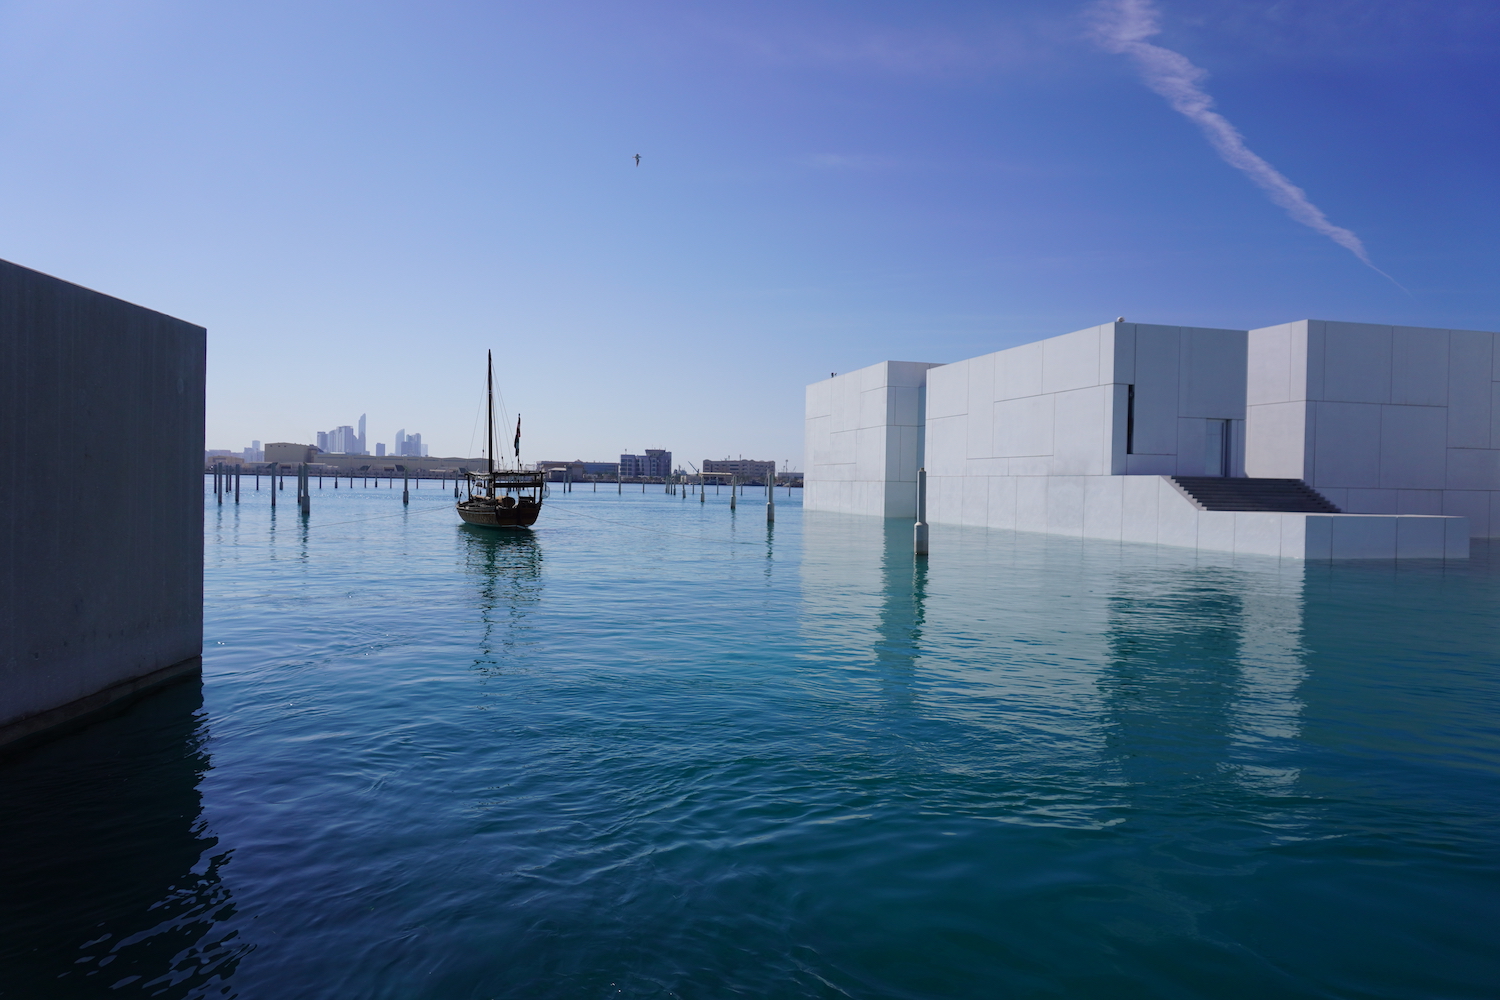 The Louvre Abu Dhabi surrounded by the Persian Gulf, where a boat floats on the turquoise water.3